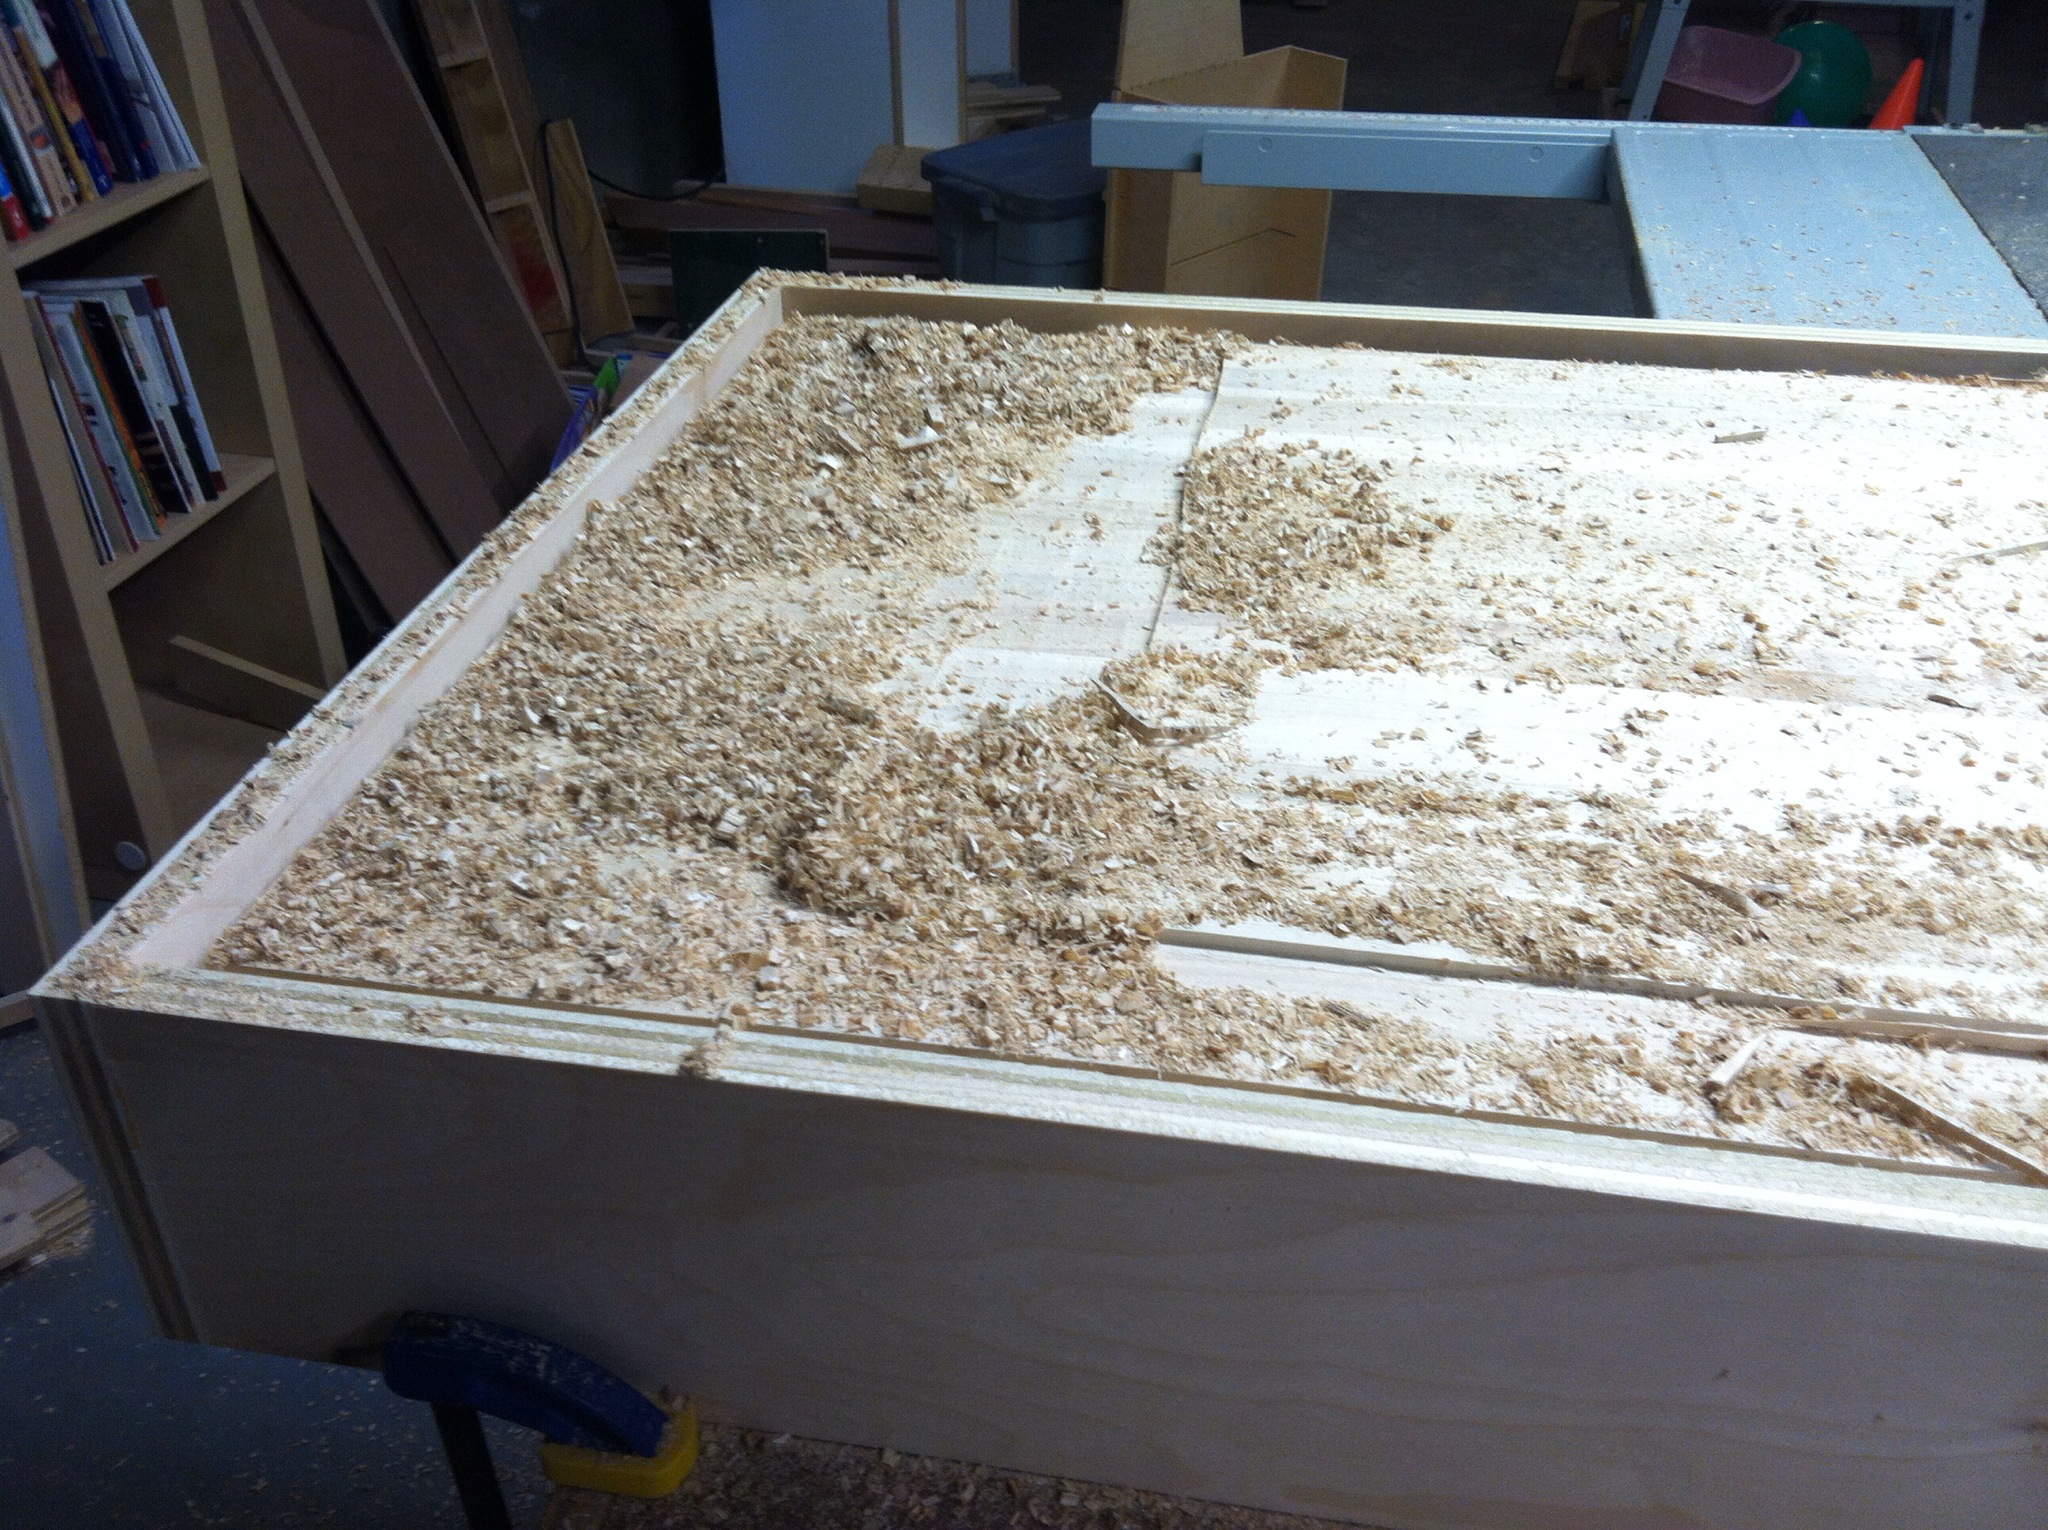 Nearing the finish of the flattening operation. This whole thing turned out much better than expected.